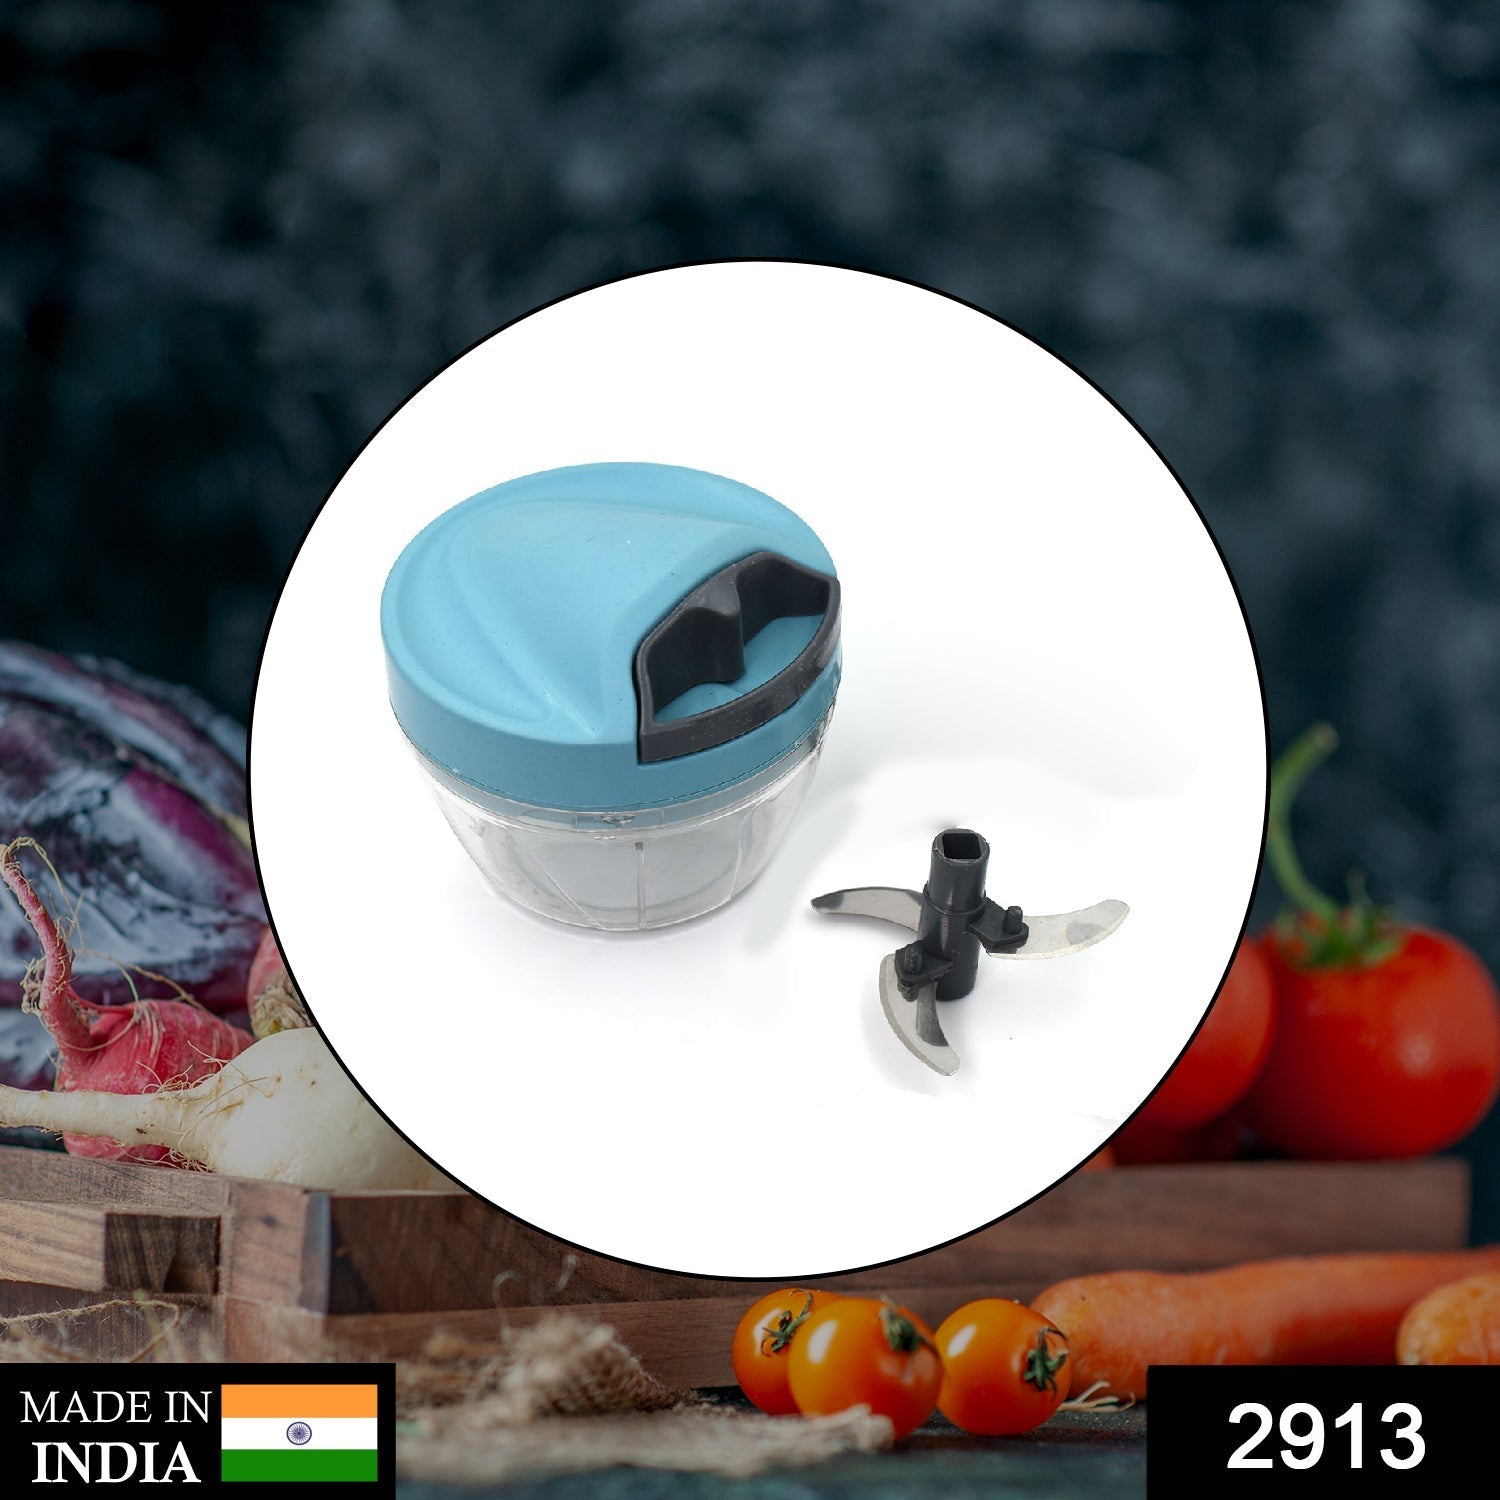 2913 Chopper with 3 Blades for Effortlessly Chopping Vegetables and Fruits for Your Kitchen 